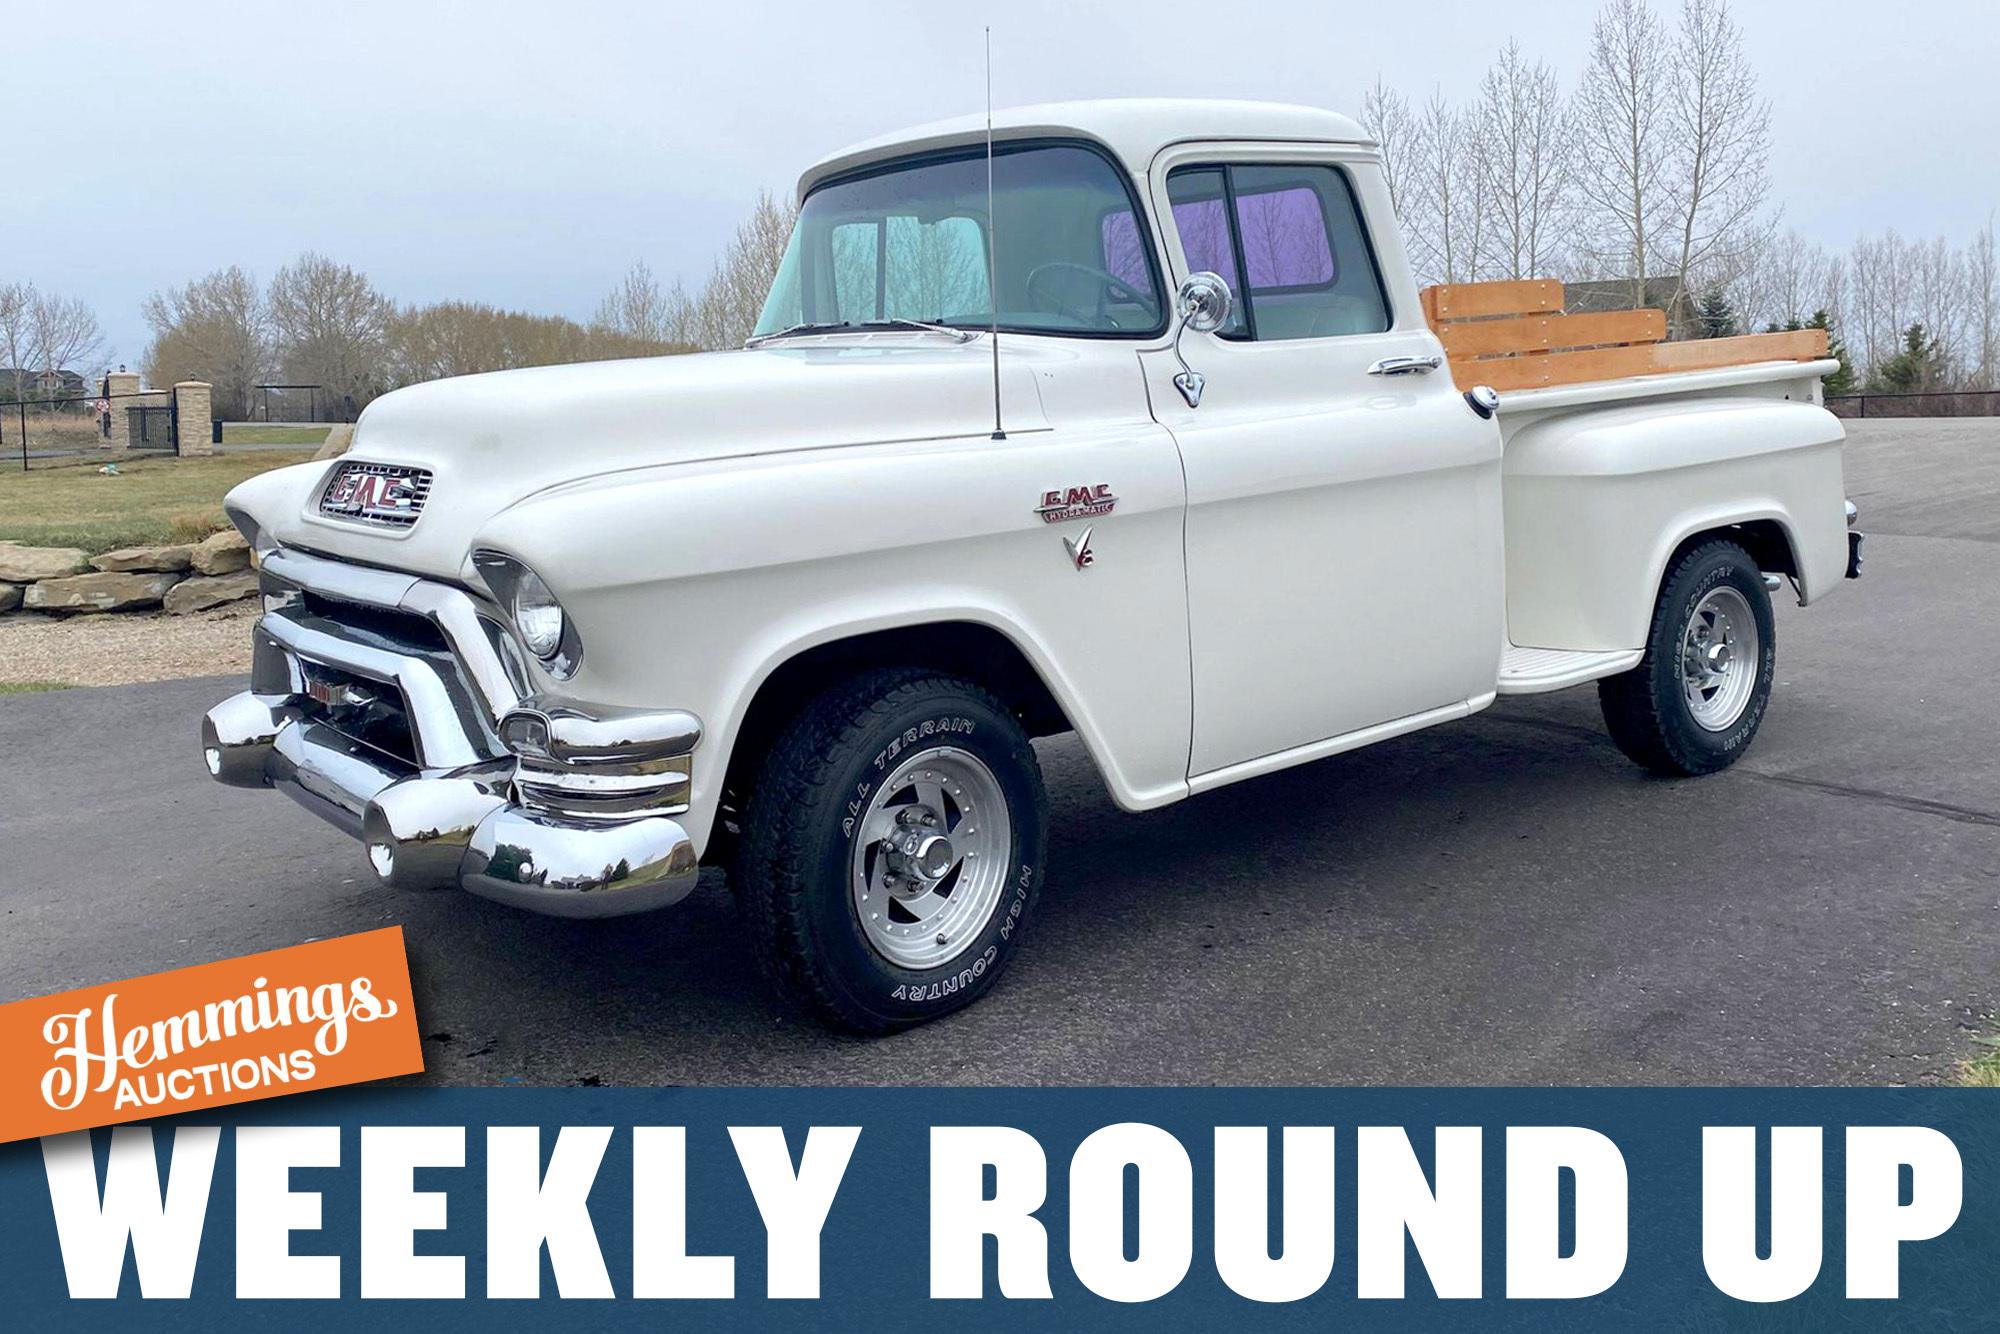 A stylish 1955 GMC pickup, Hemi-powered Road Runner, and split-window '63 Corvette: Hemmings Auctions Weekly Round Up for October 16-22, 2022